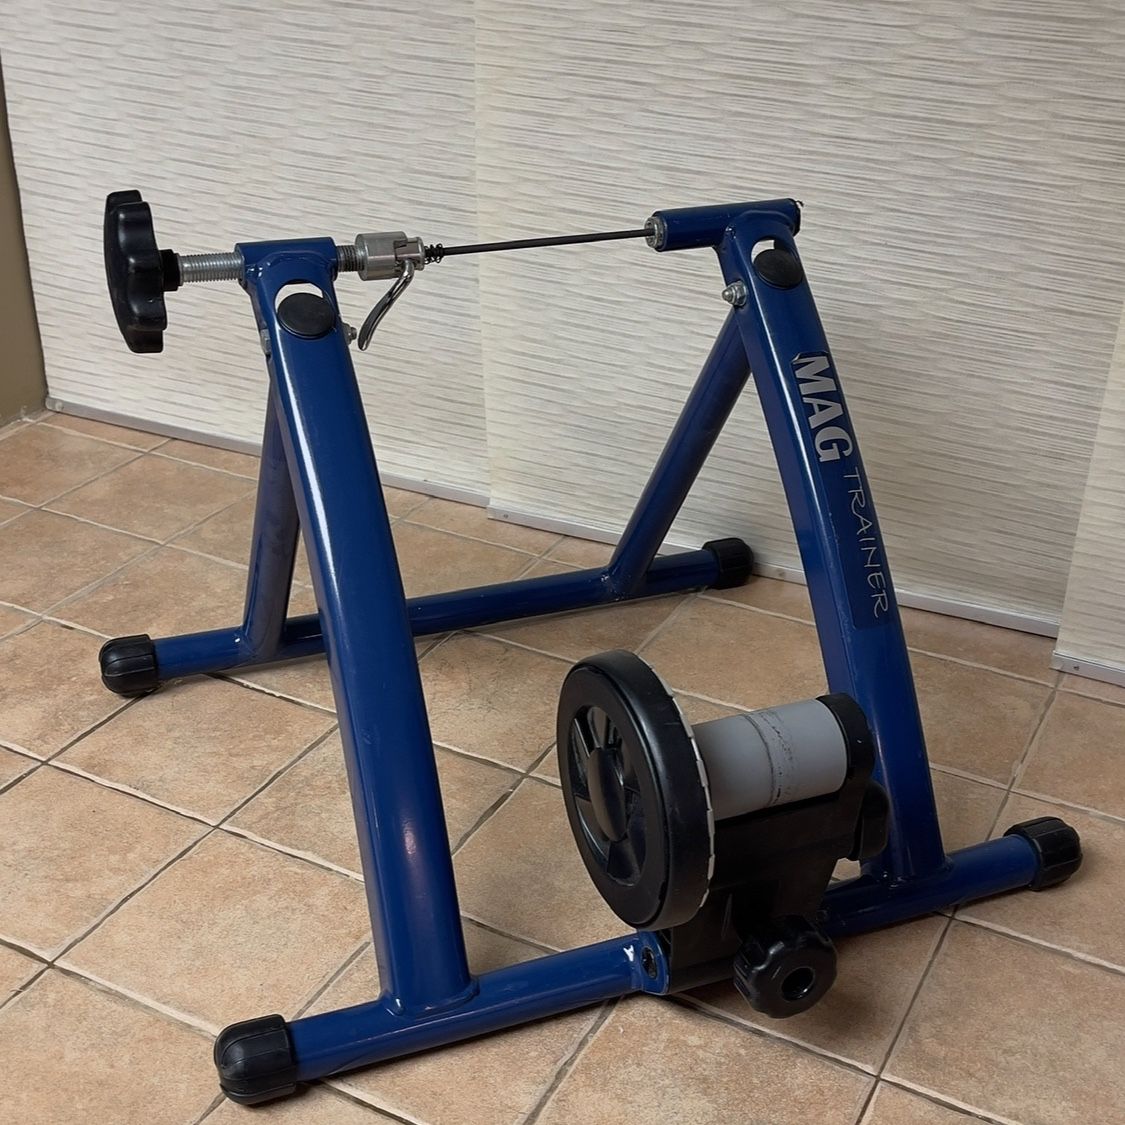 Bicycle training stand